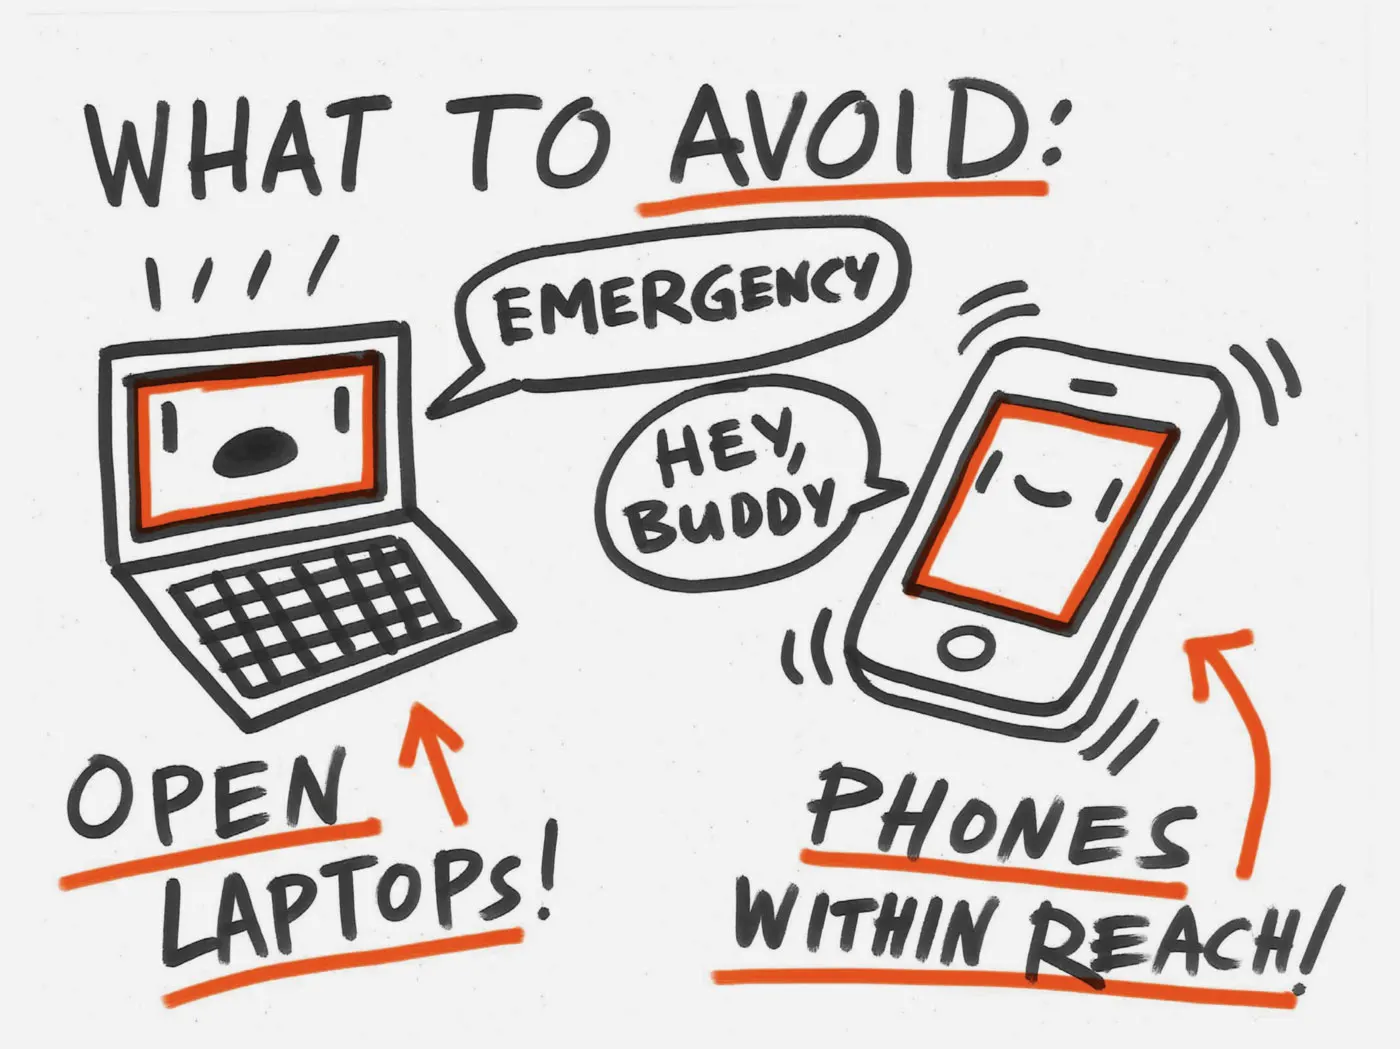 Black marker sketch with the heading "What to Avoid" with drawing/word pairings of open laptops and phones within reach.